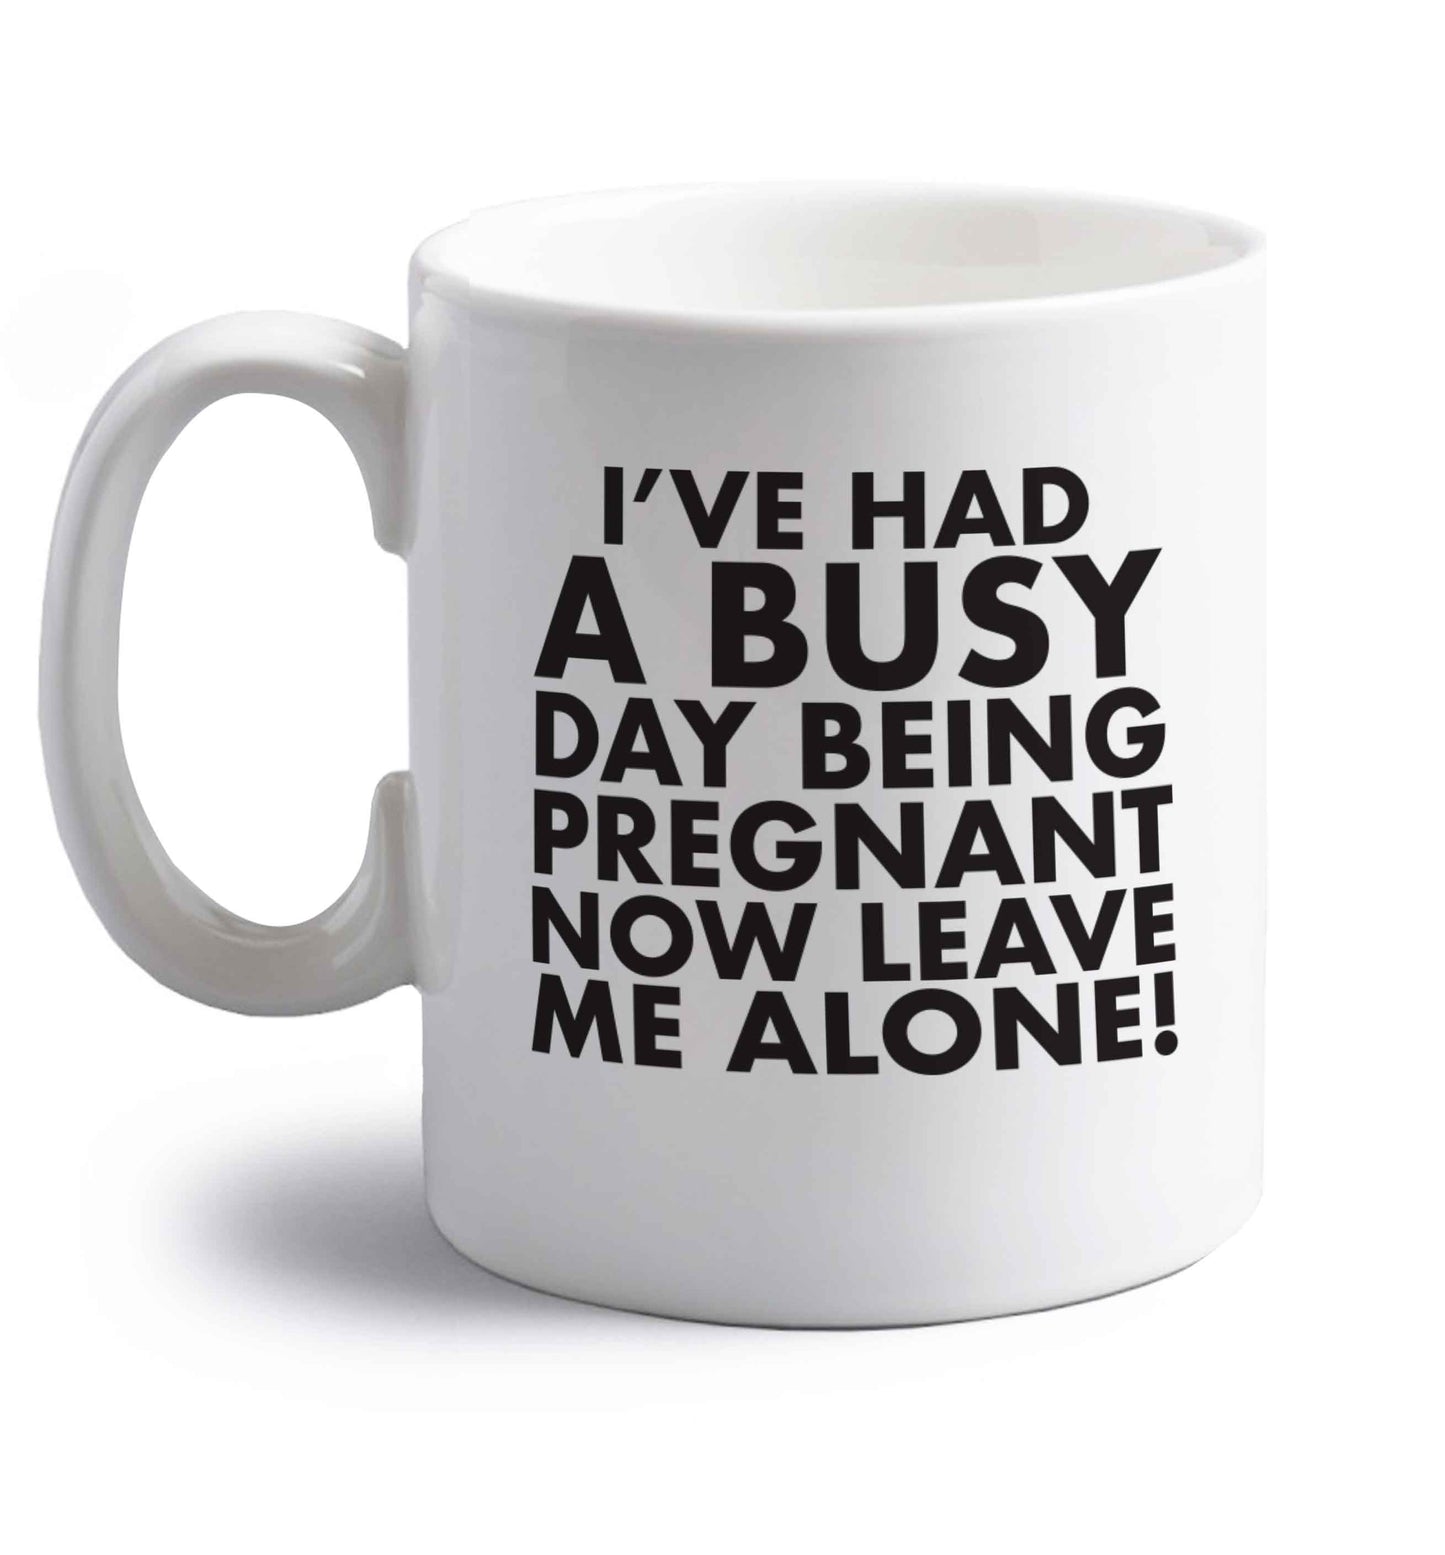 I've had a busy day being pregnant now leave me alone right handed white ceramic mug 